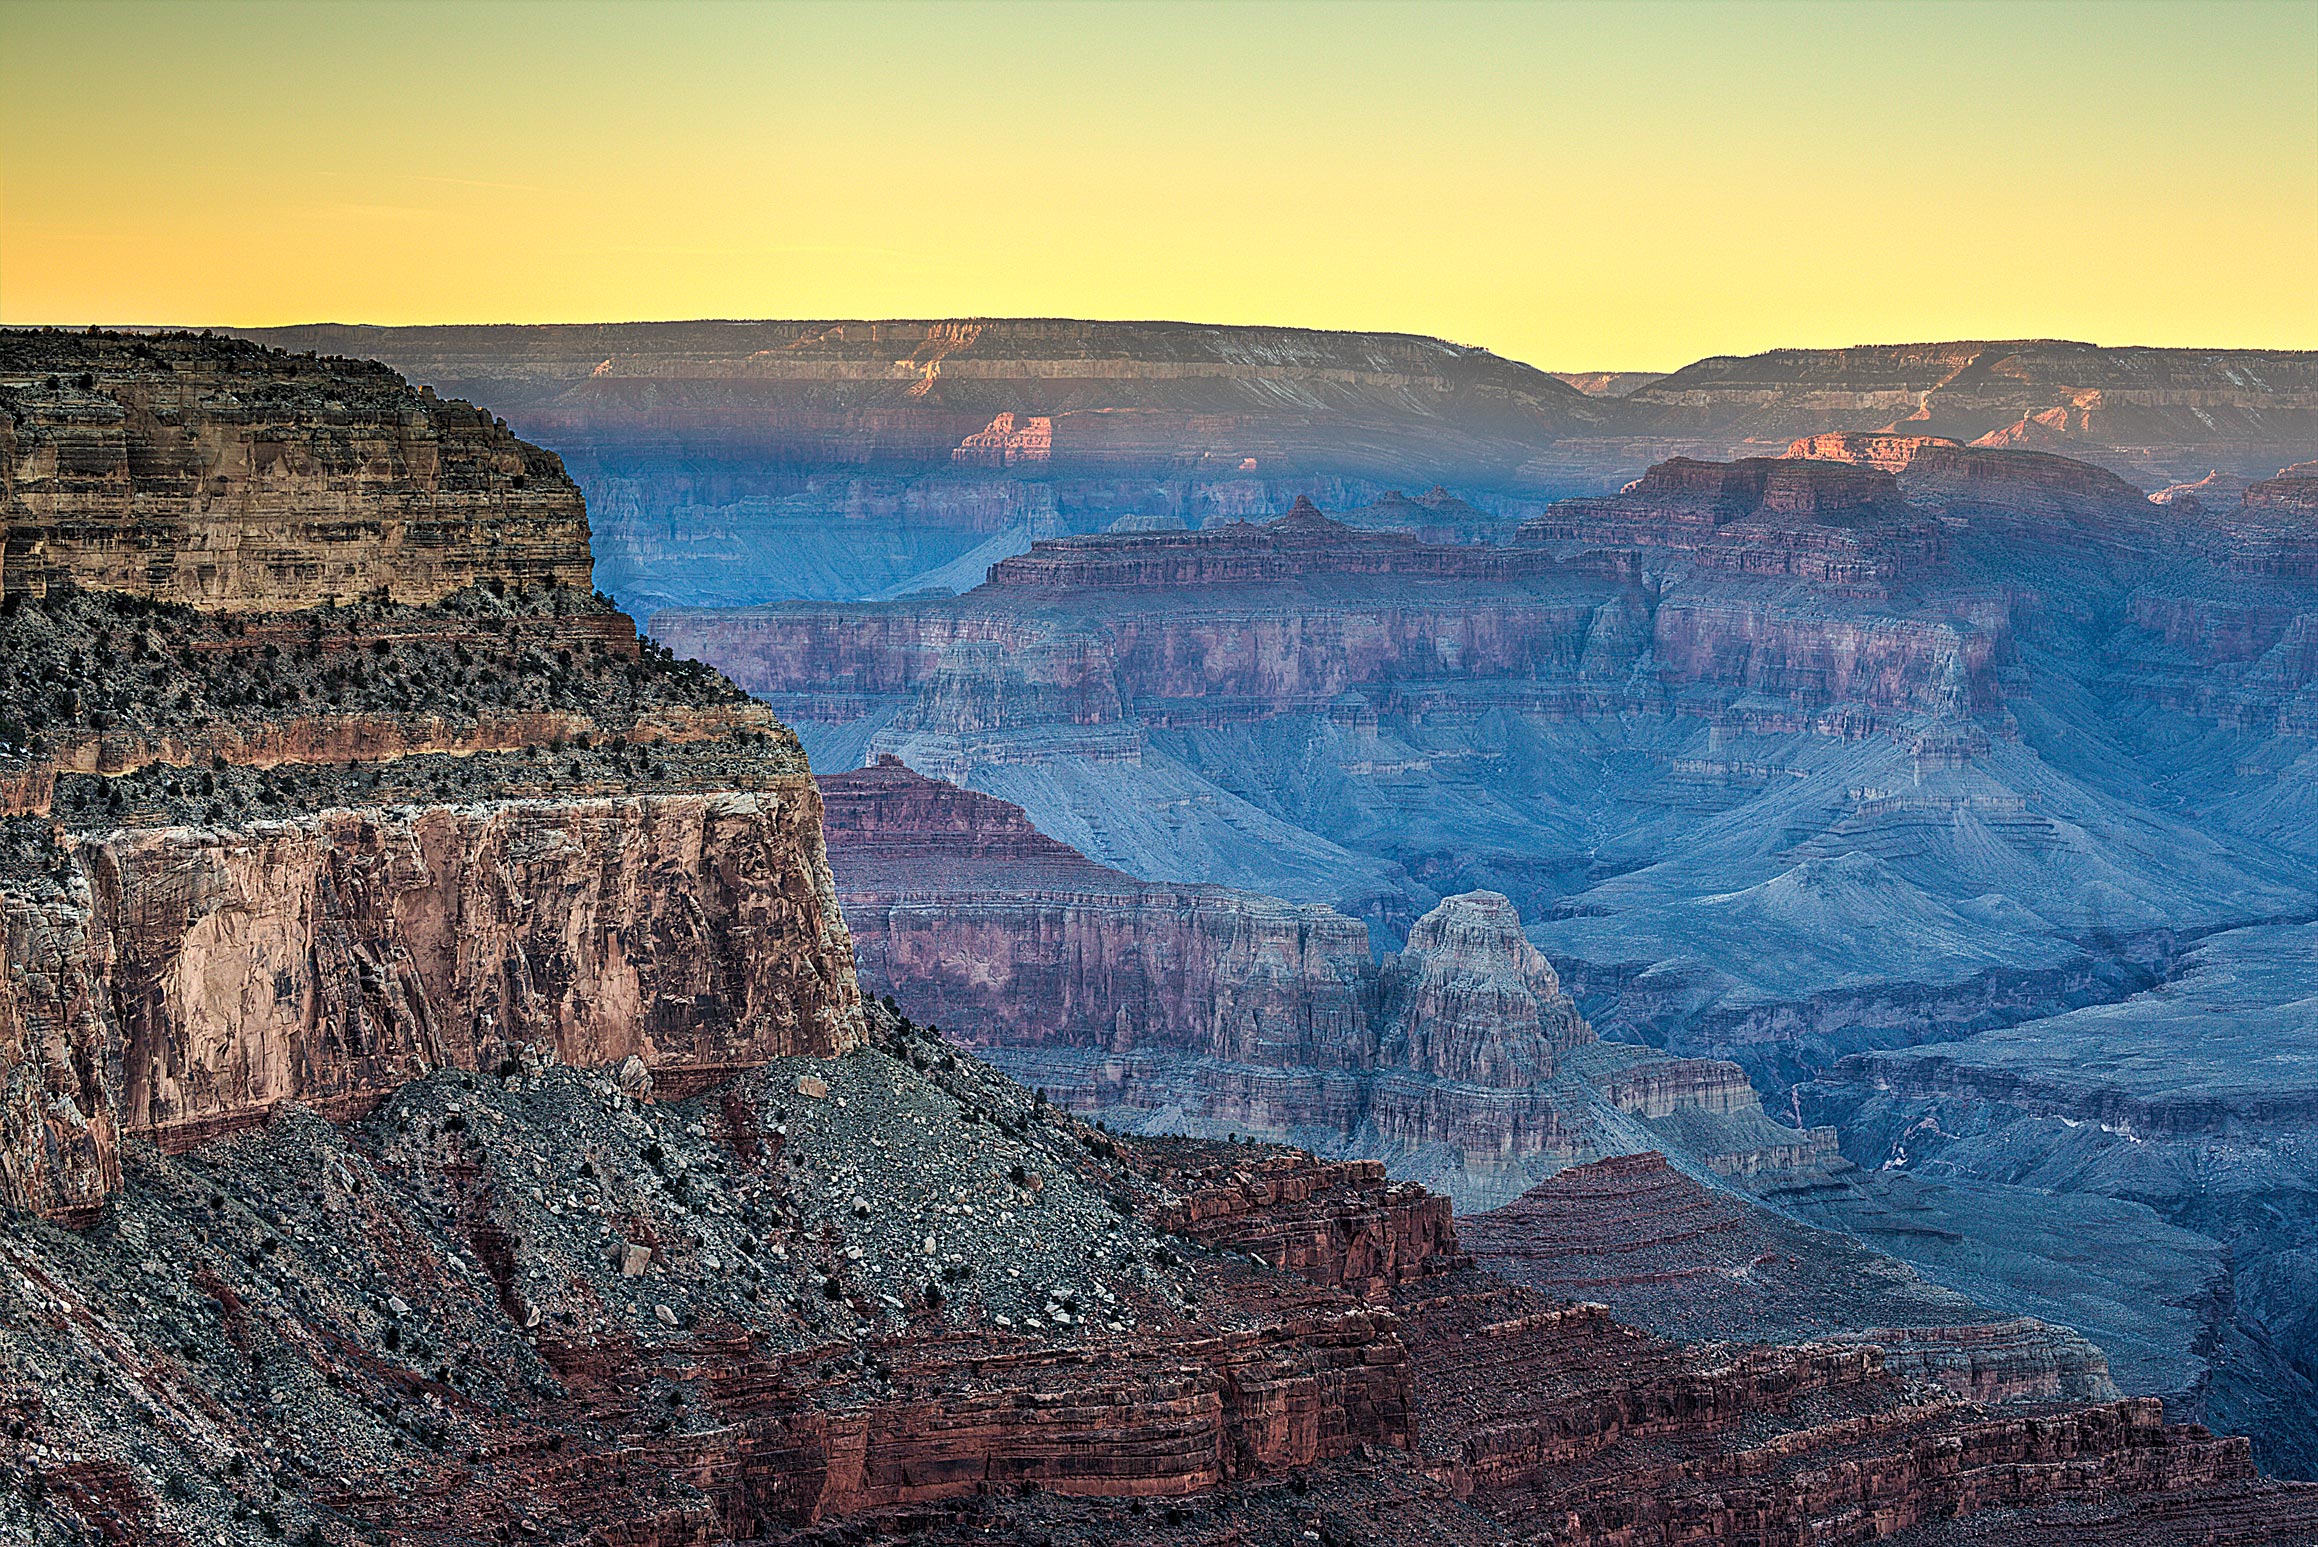 The Sun Rises over the South Rim of the Grand Canyon